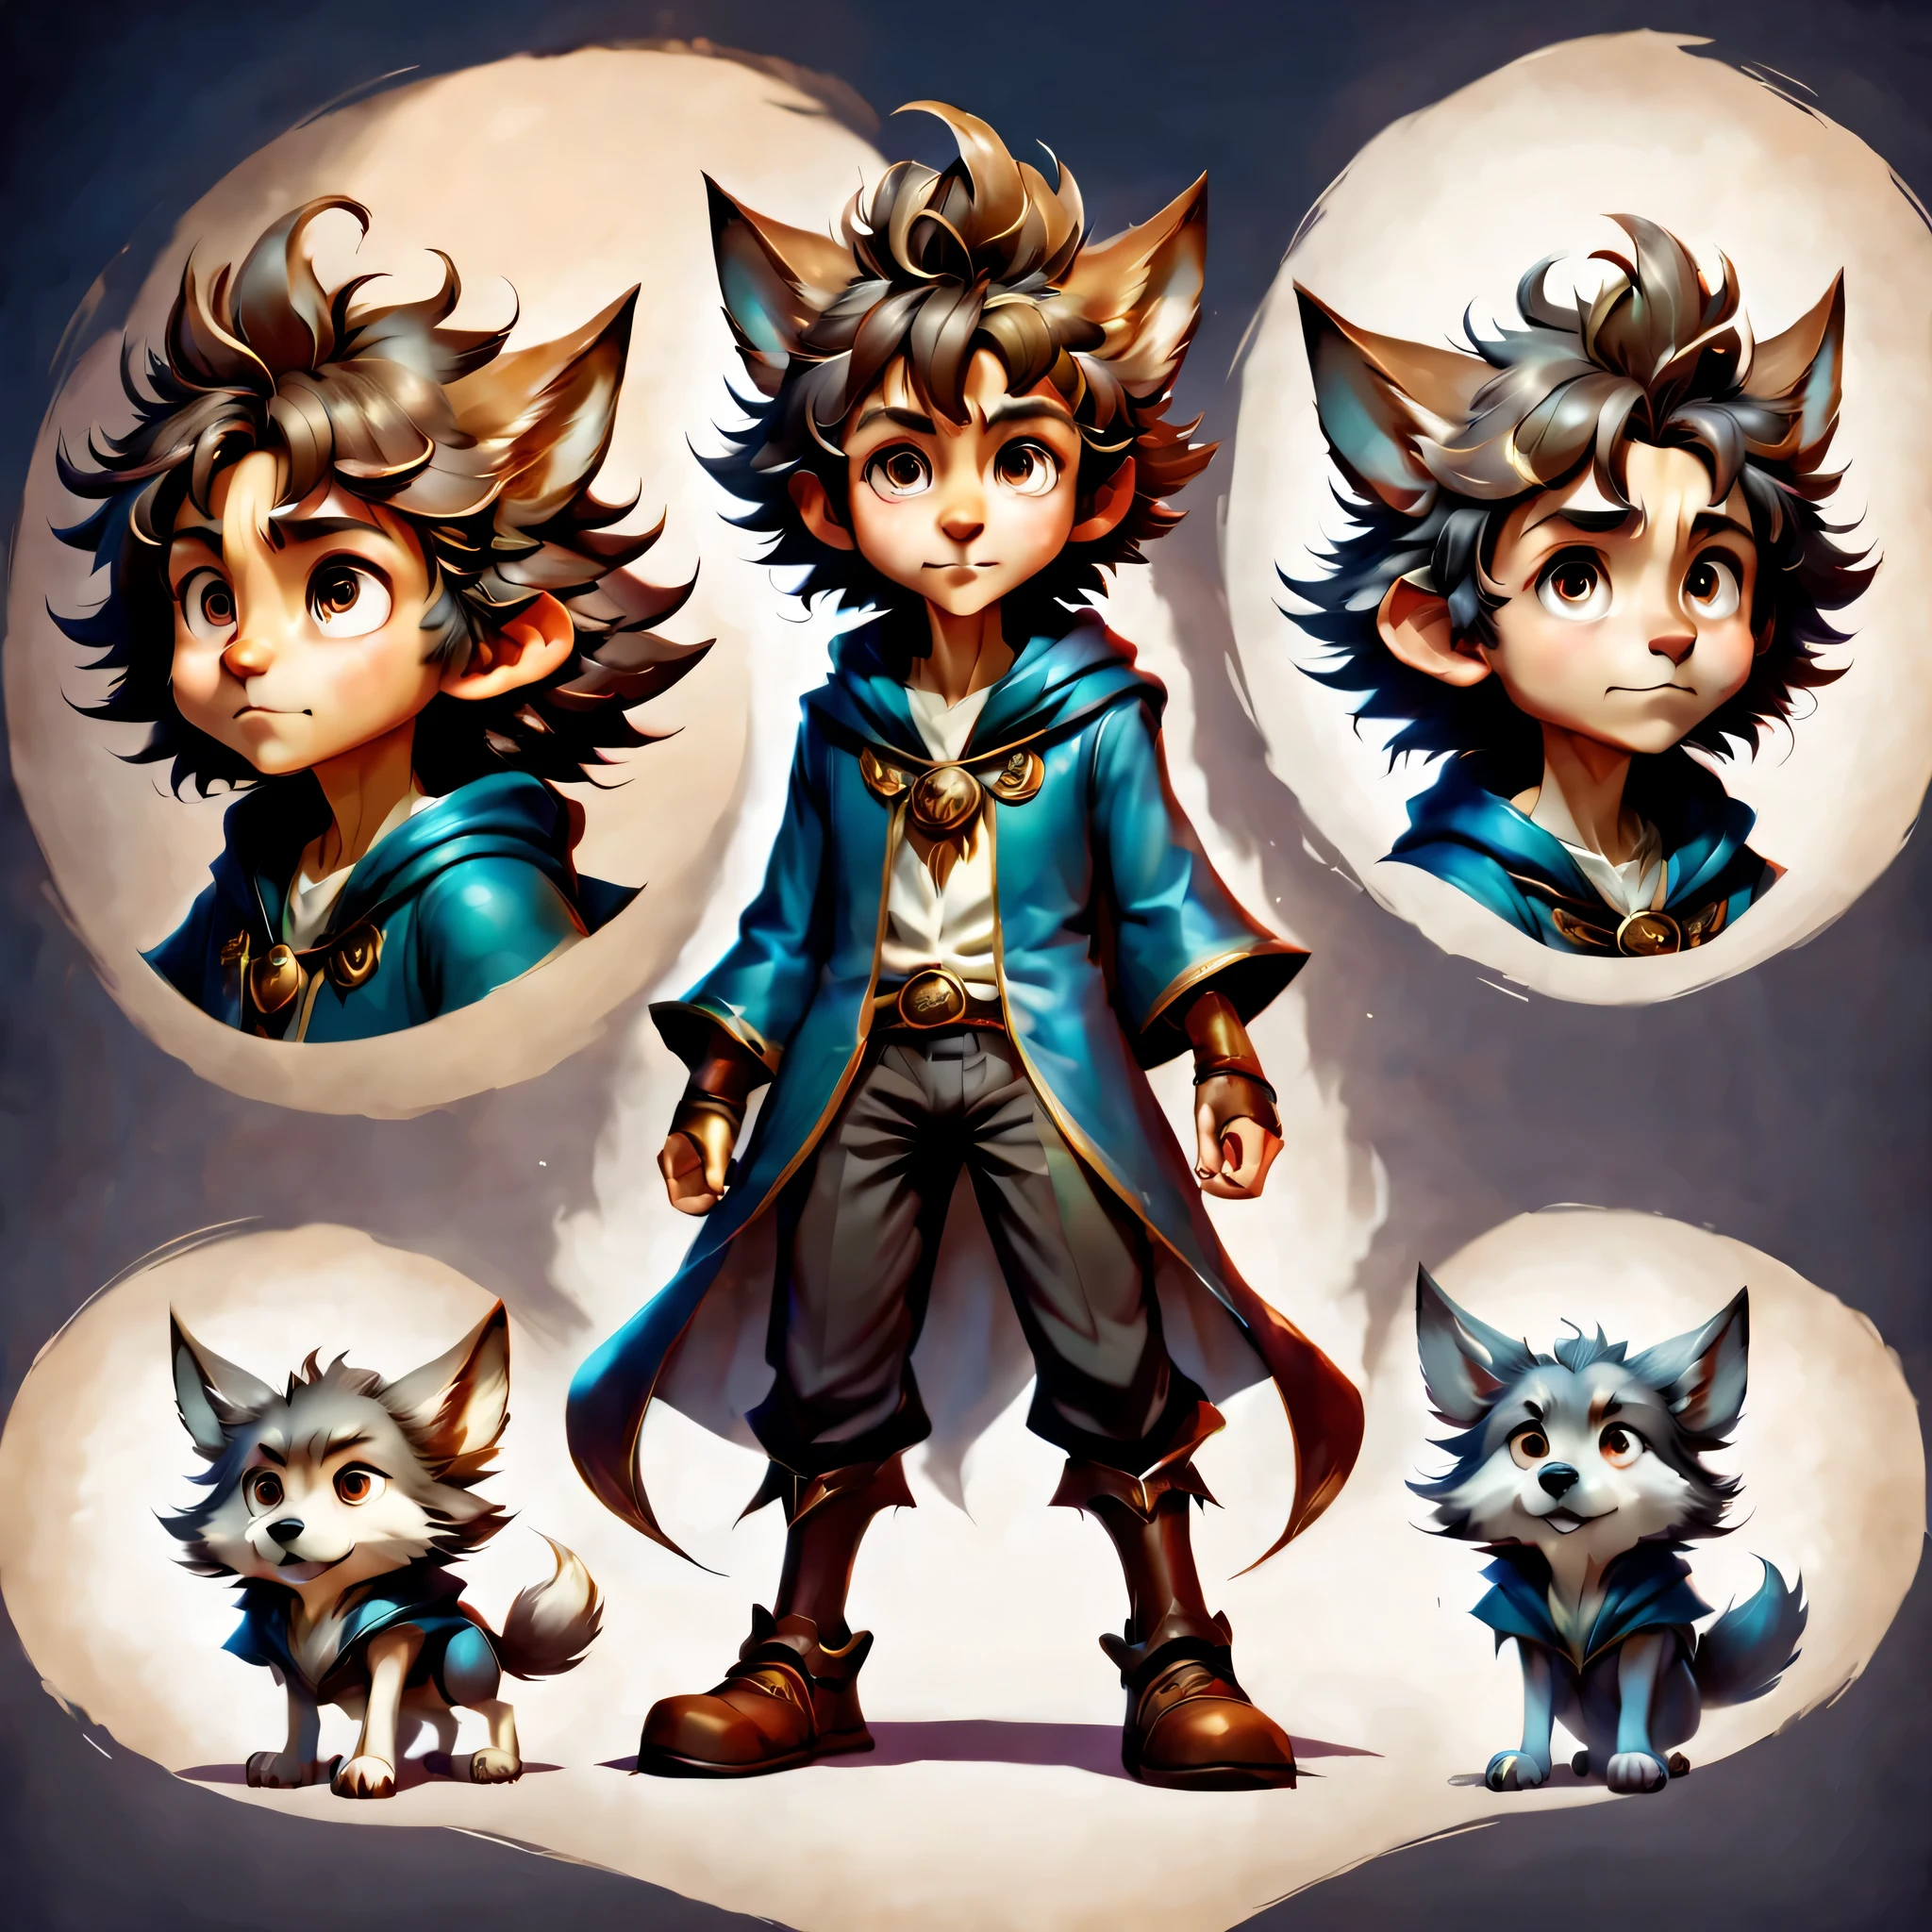 Create an original character design sheet,anime main character,boy,wizard,natural perm,wolf ears and nose,((3 views,whole body, background,multiple views,High resolution)),be familiar with,multiple views,Active,action pose,dynamic,nice,cute,masterpiece,highest quality,In detail,gracefully,sketch,sketch,ラフsketch,propose